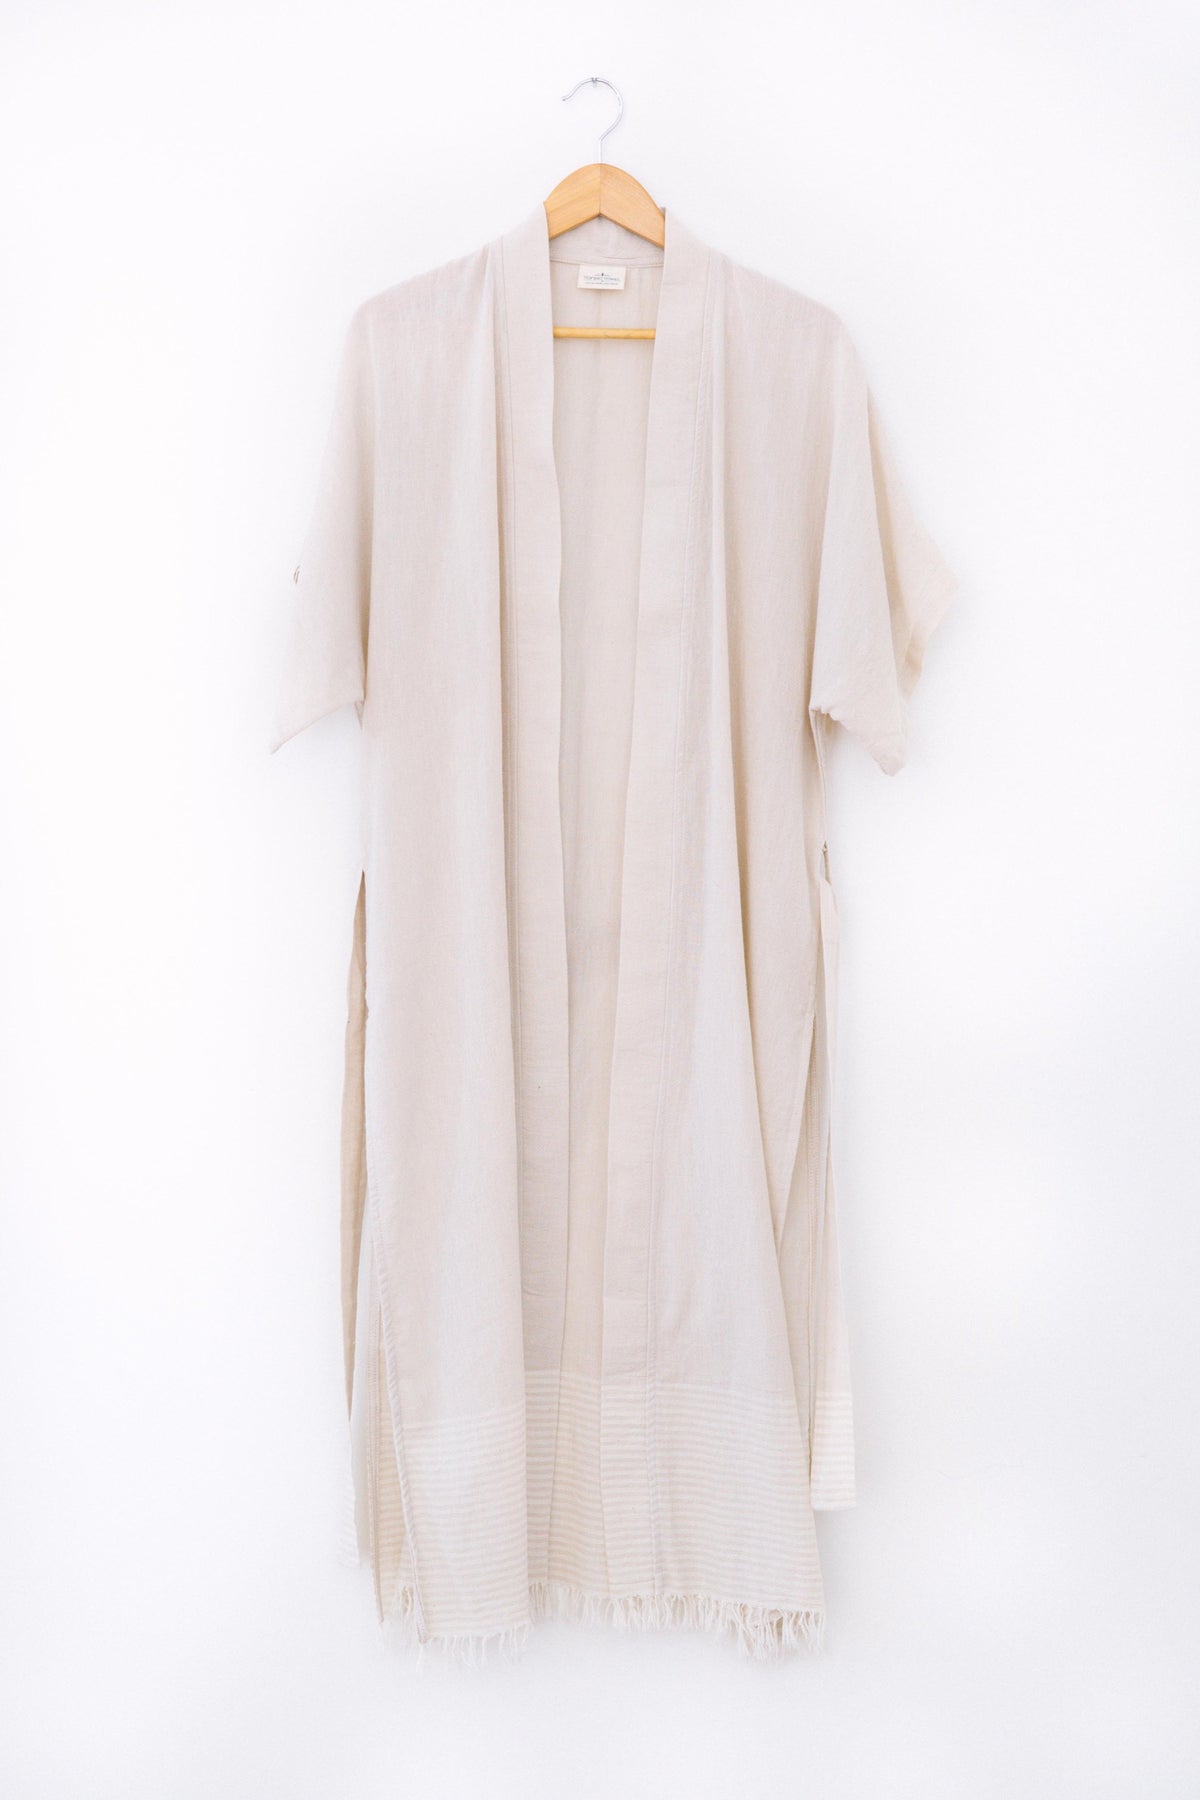 The Drifter Coverup – Tofino Towel Co.